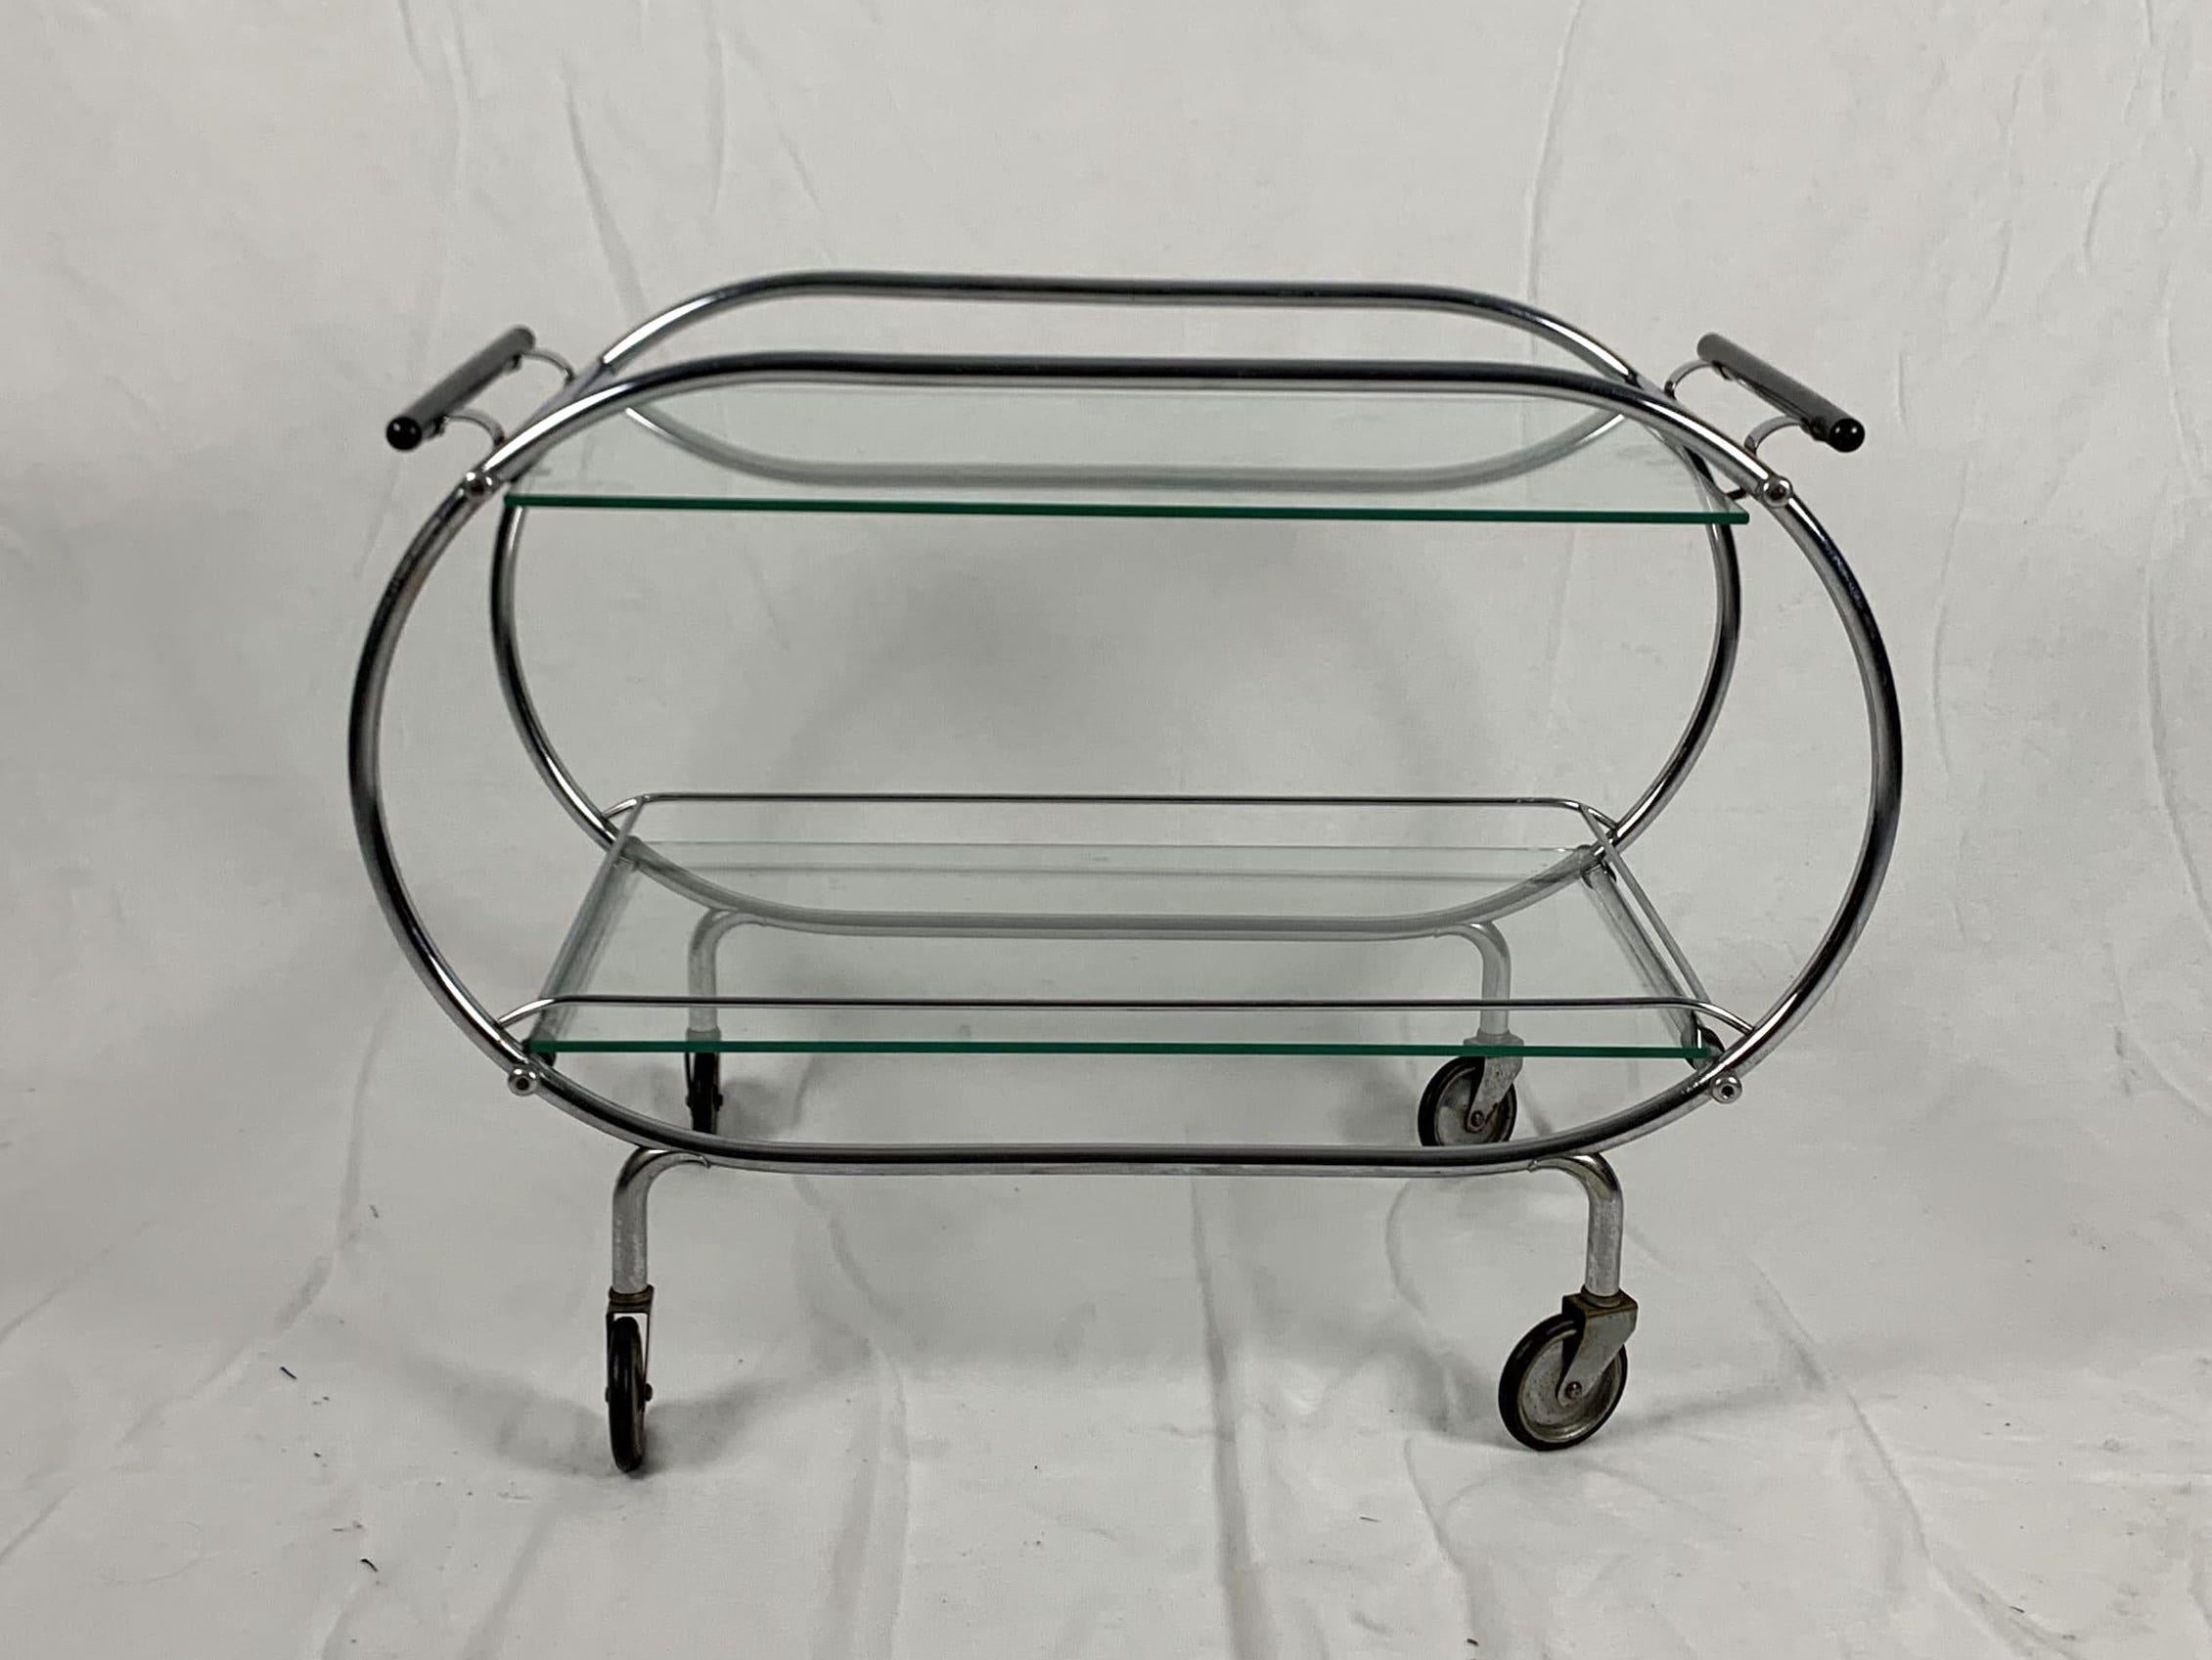 Art Deco / Bauhaus serving trolley / cart / mobile table from France, circa 1925.

Chromed tubular steeltube frame with original patina on 4 wheels. 
2 original glass shelves. Black lacquered wooden handles on two sides.

Dimensions: H 58 cm x